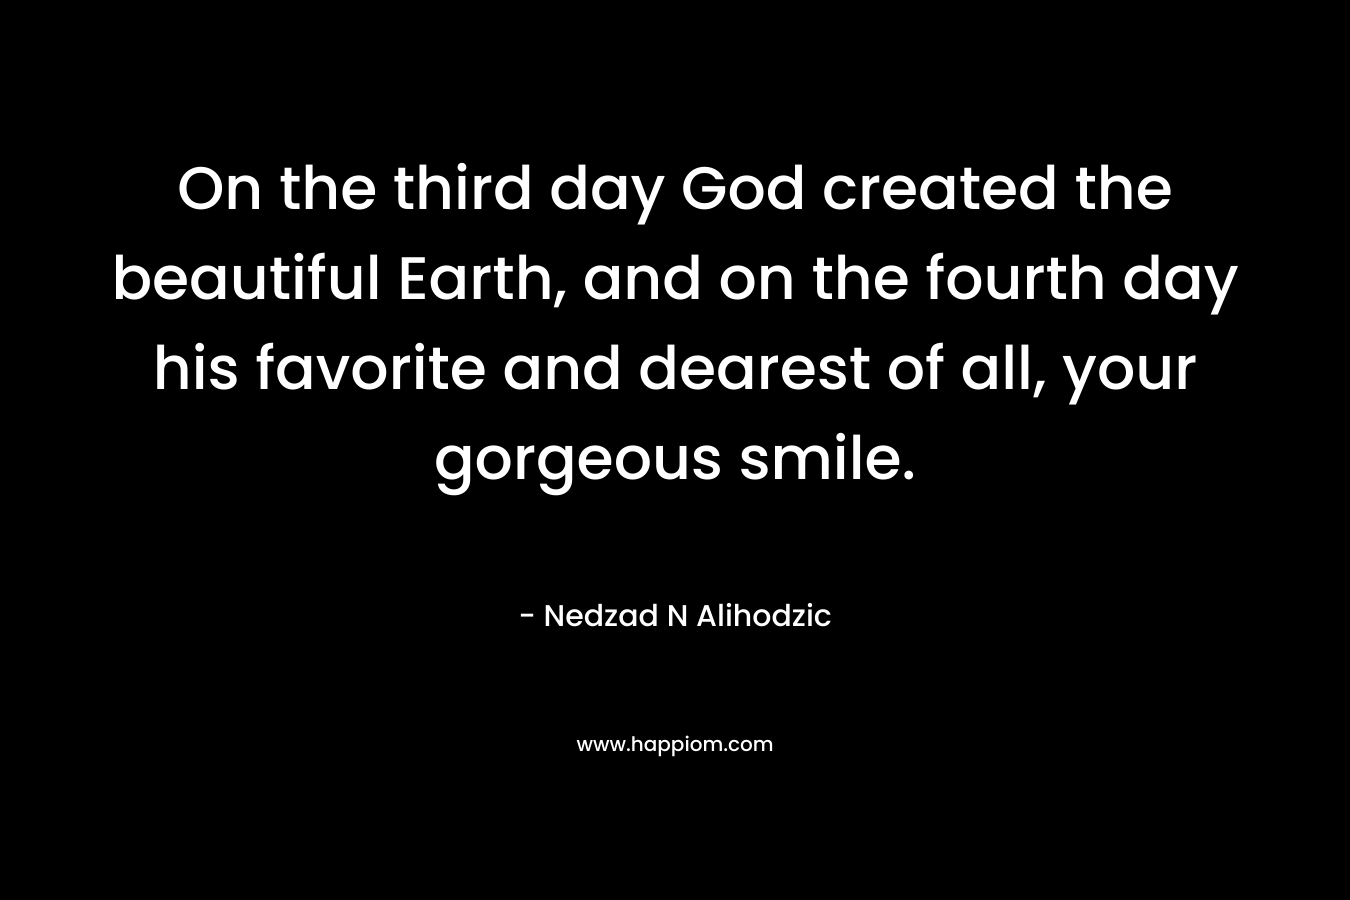 On the third day God created the beautiful Earth, and on the fourth day his favorite and dearest of all, your gorgeous smile. – Nedzad N Alihodzic